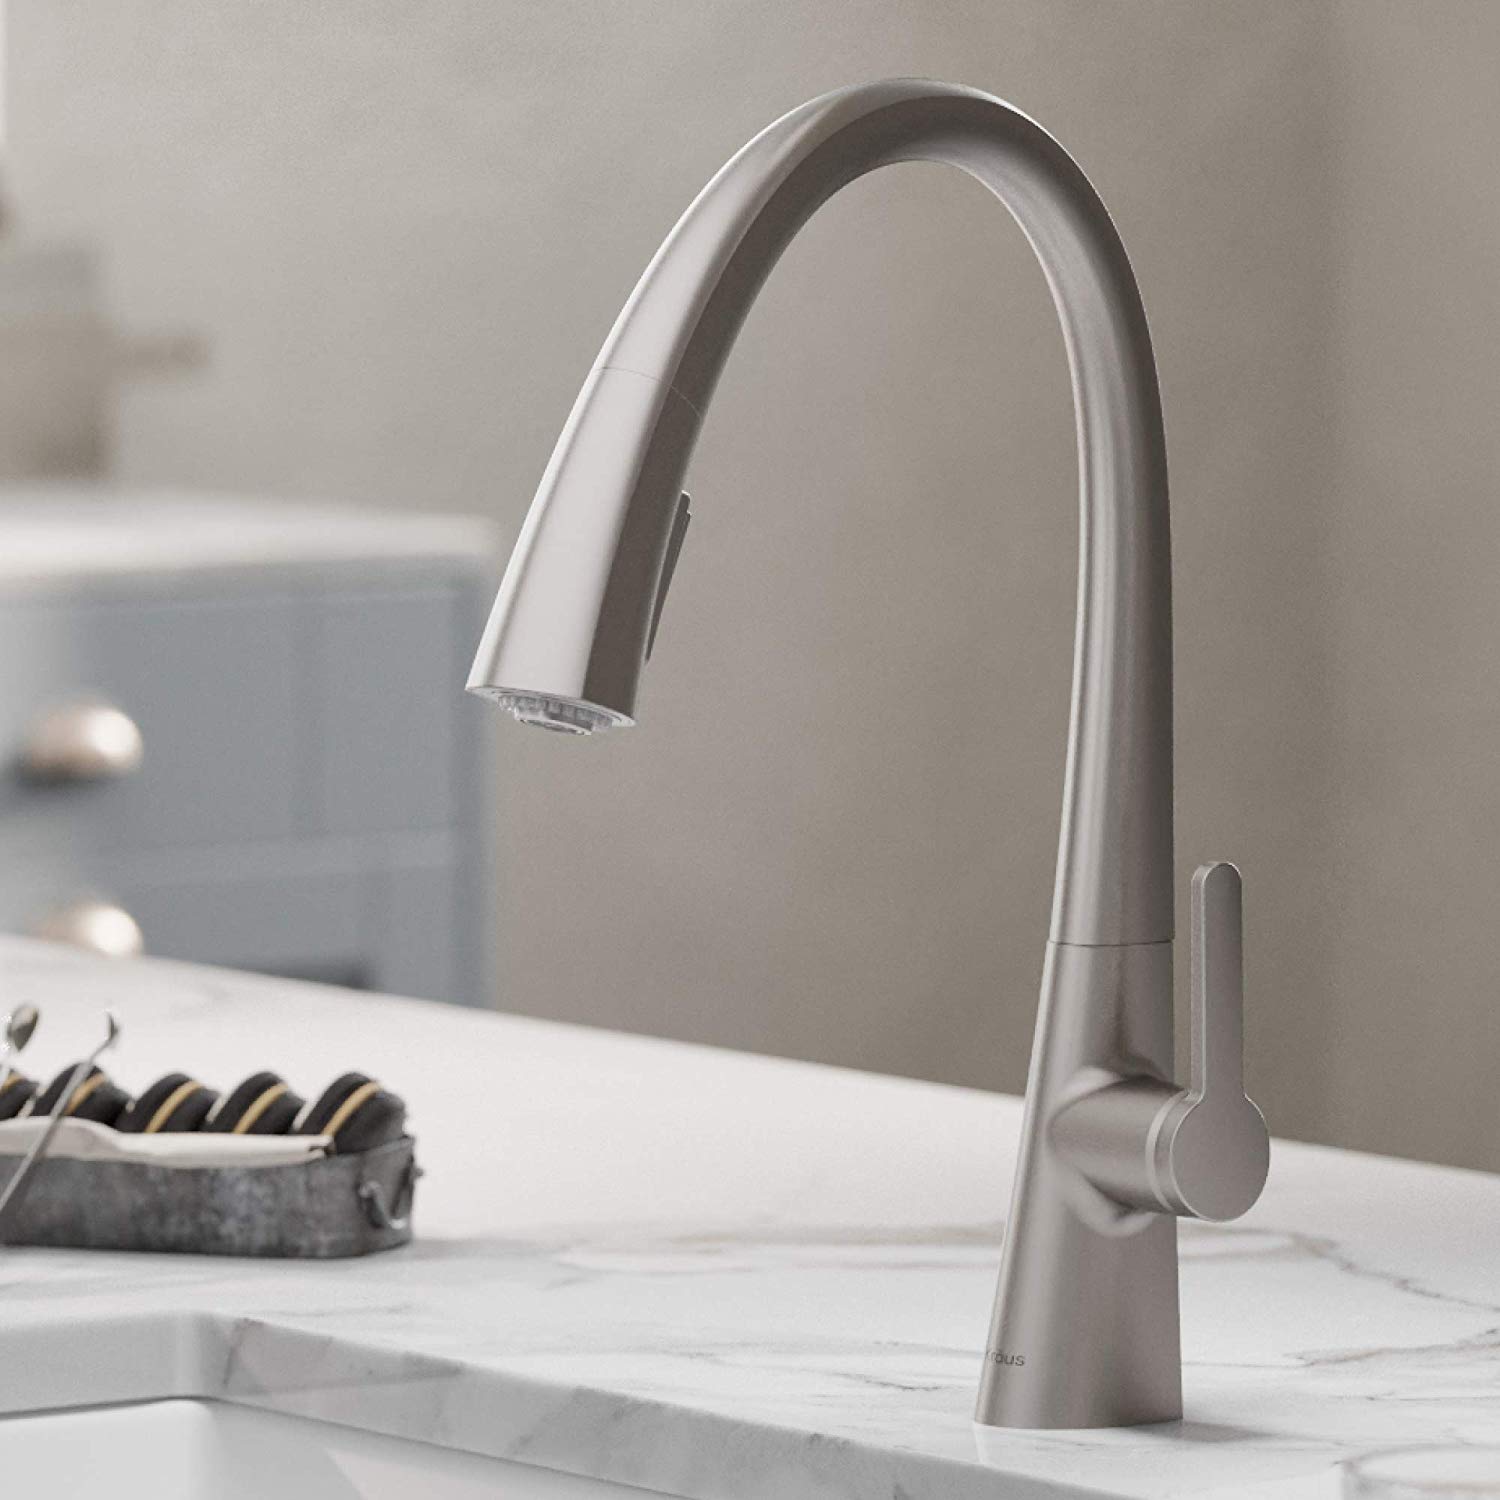 10 Best Touchless Kitchen Faucets Reviews of 2020